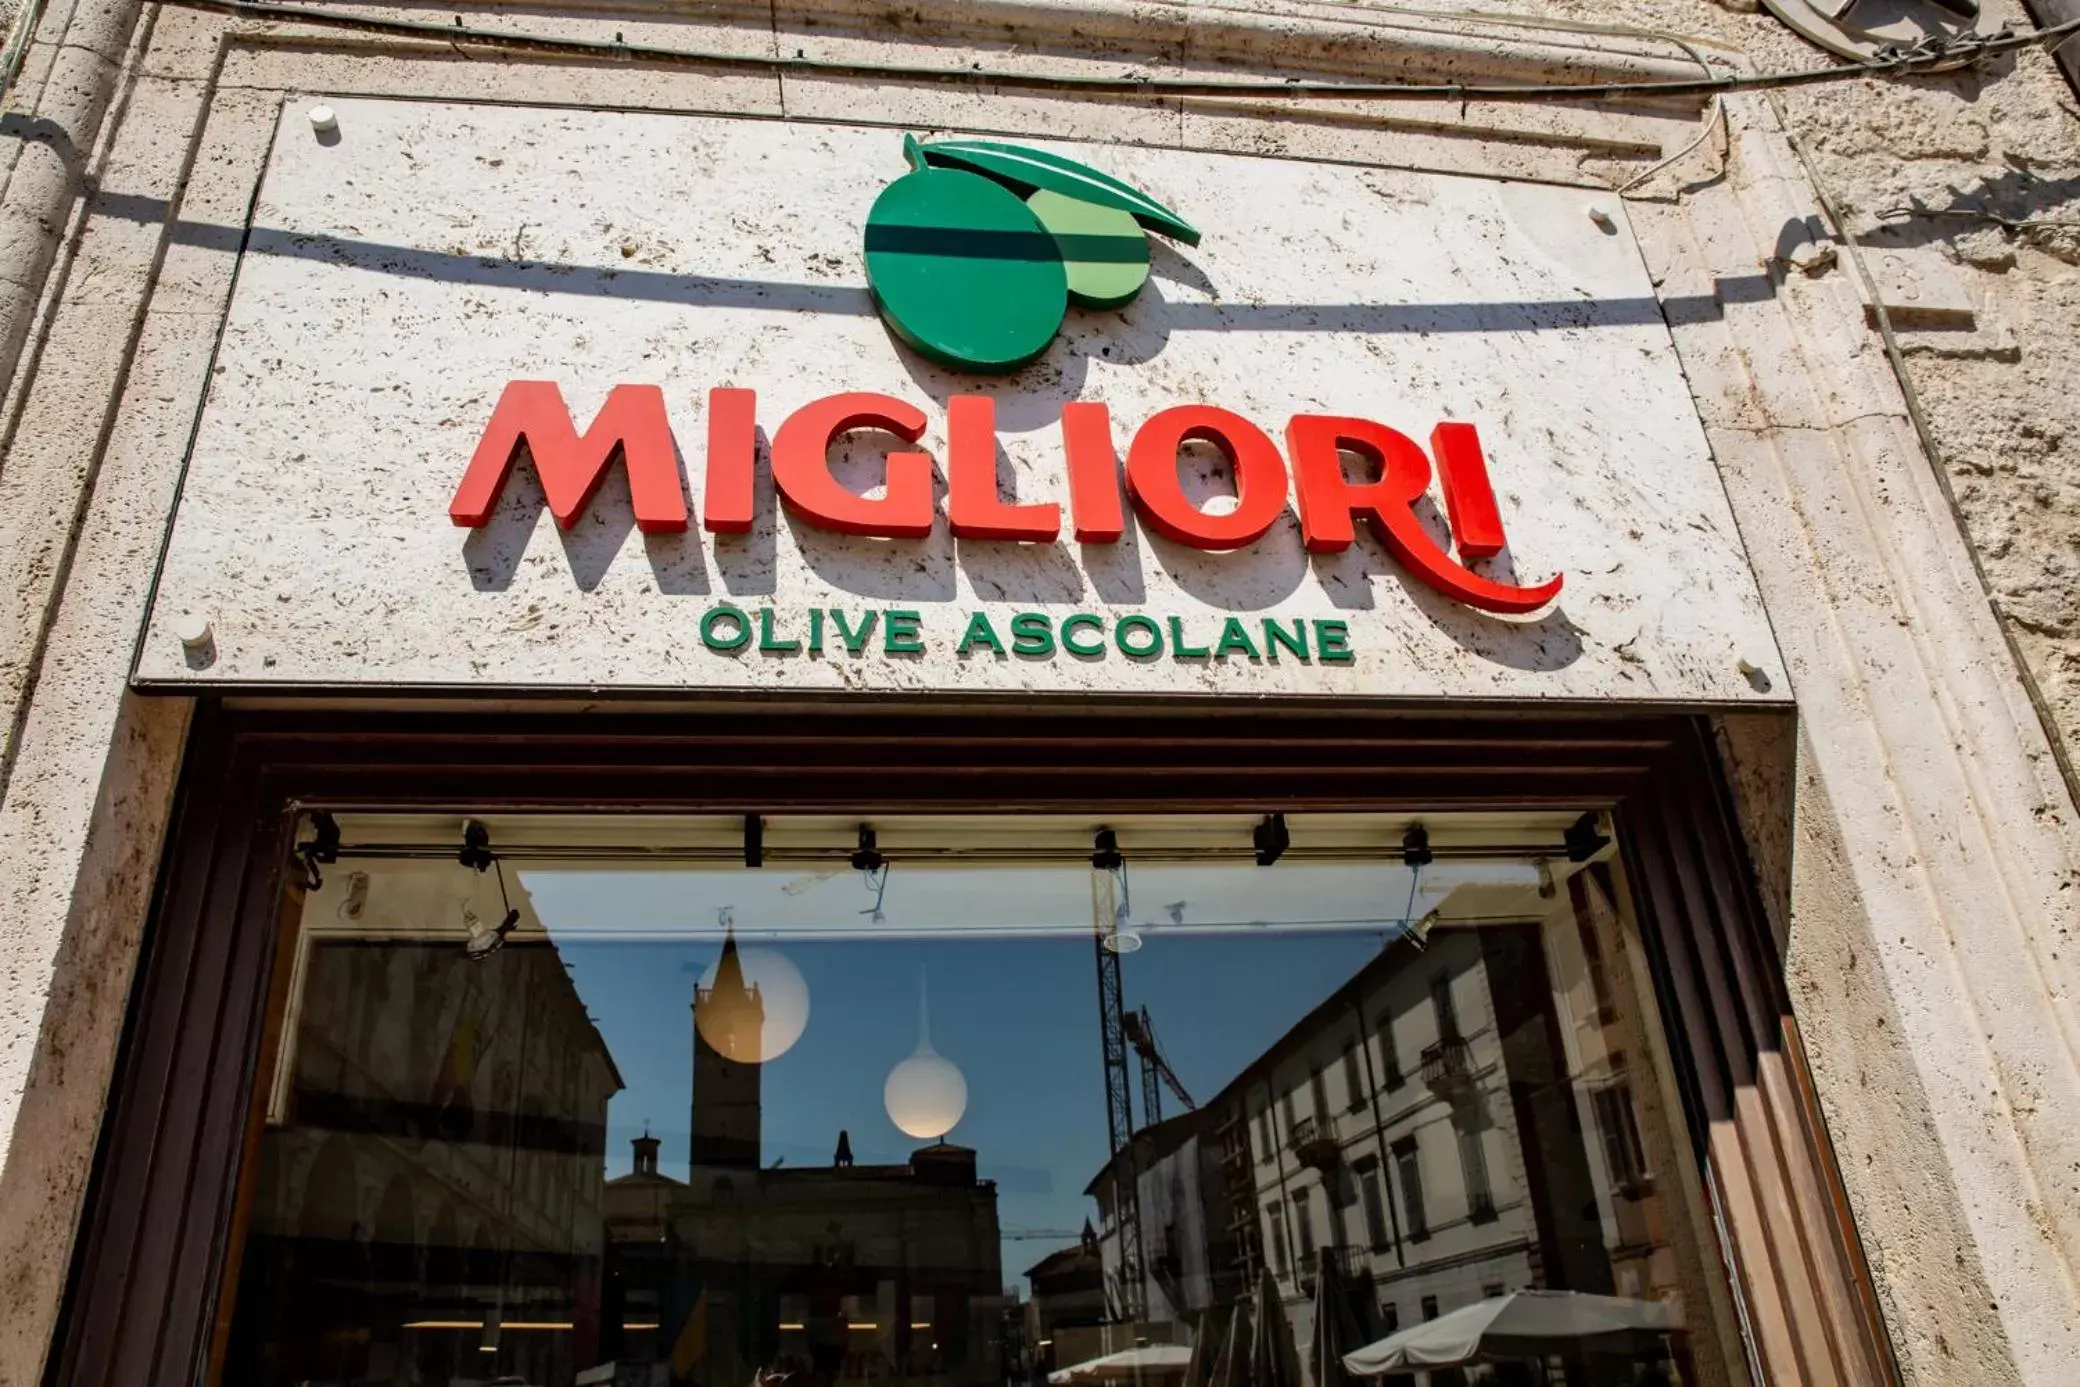 Property logo or sign in Migliori Olive Ascolane beds